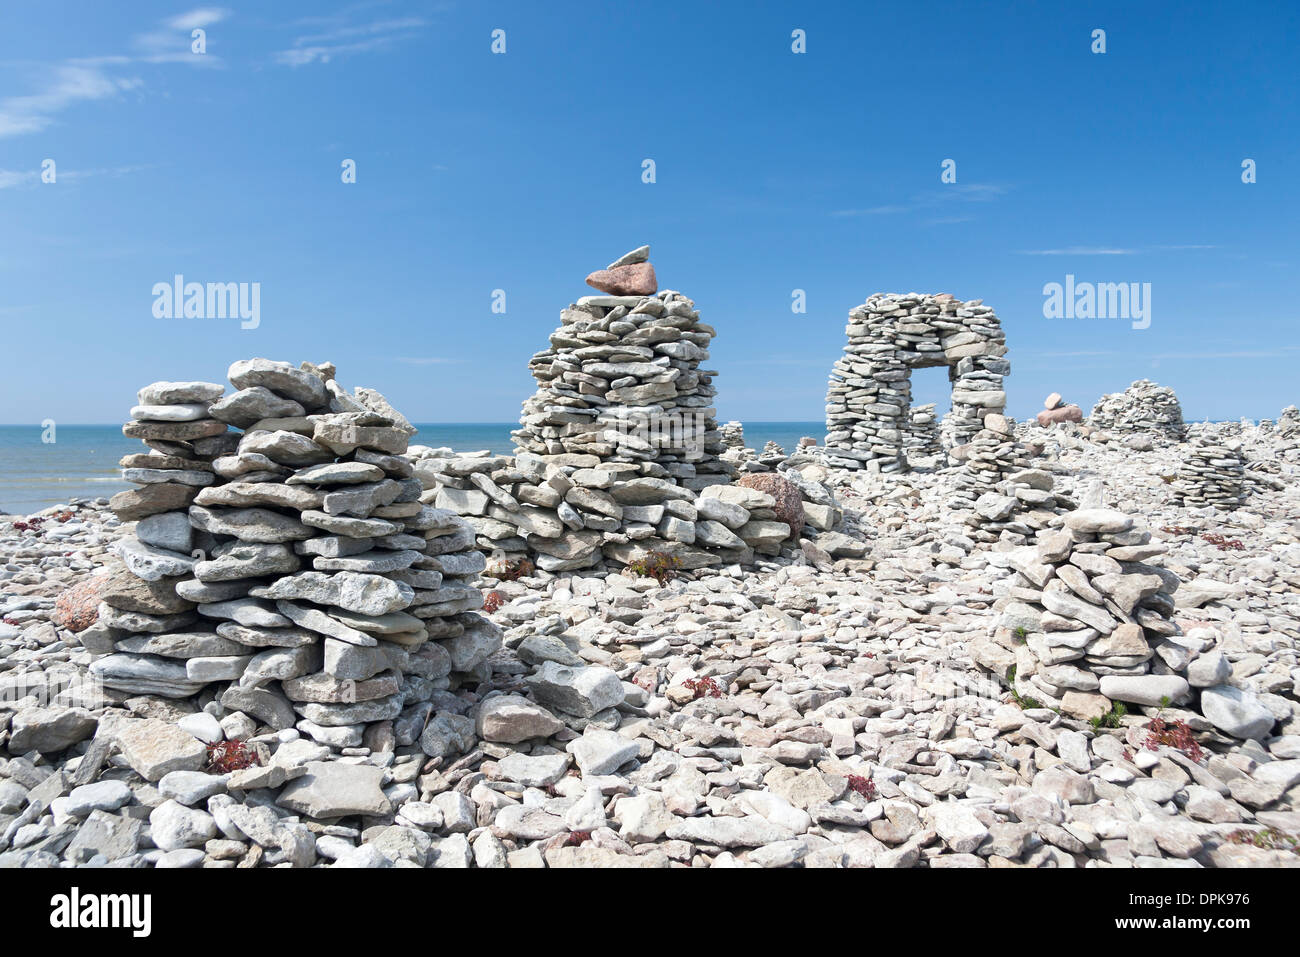 Stone objects or sculptures stowed or piled by tourists in Saaremaa, Estonia Stock Photo